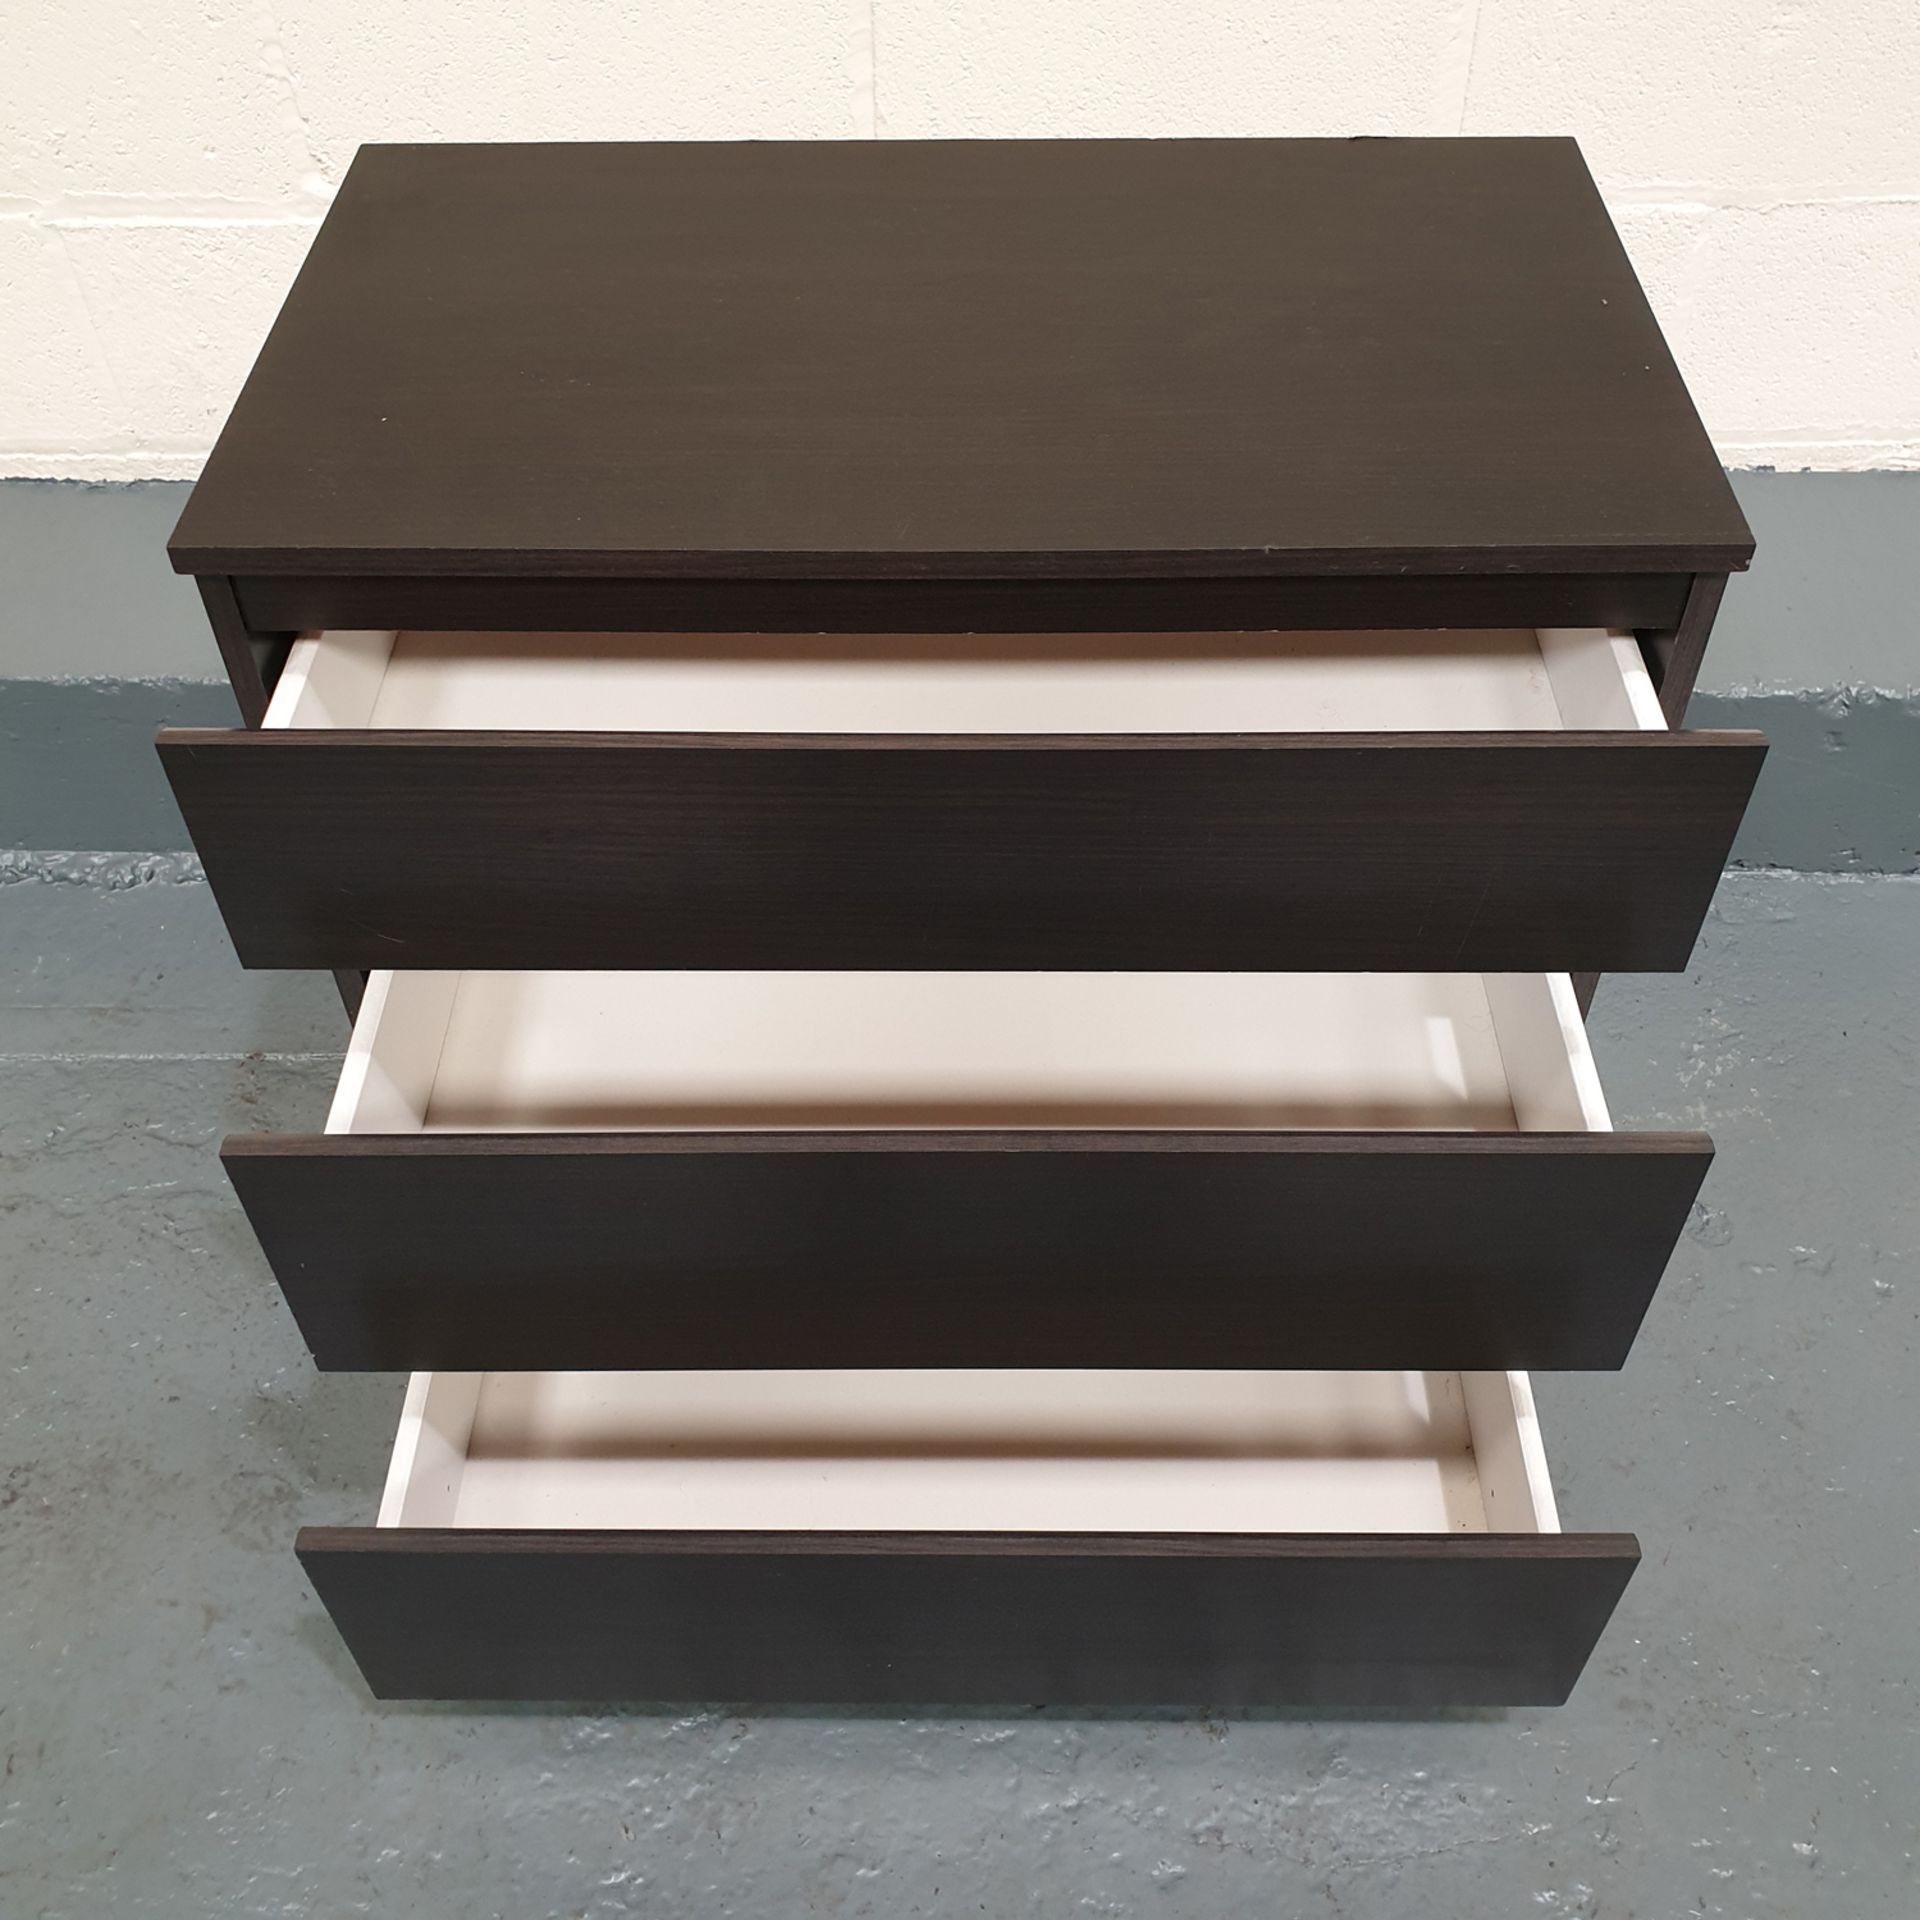 Set of Drawers. Approx Dimensions 700mm x 400mm x 710mm High. - Image 4 of 4